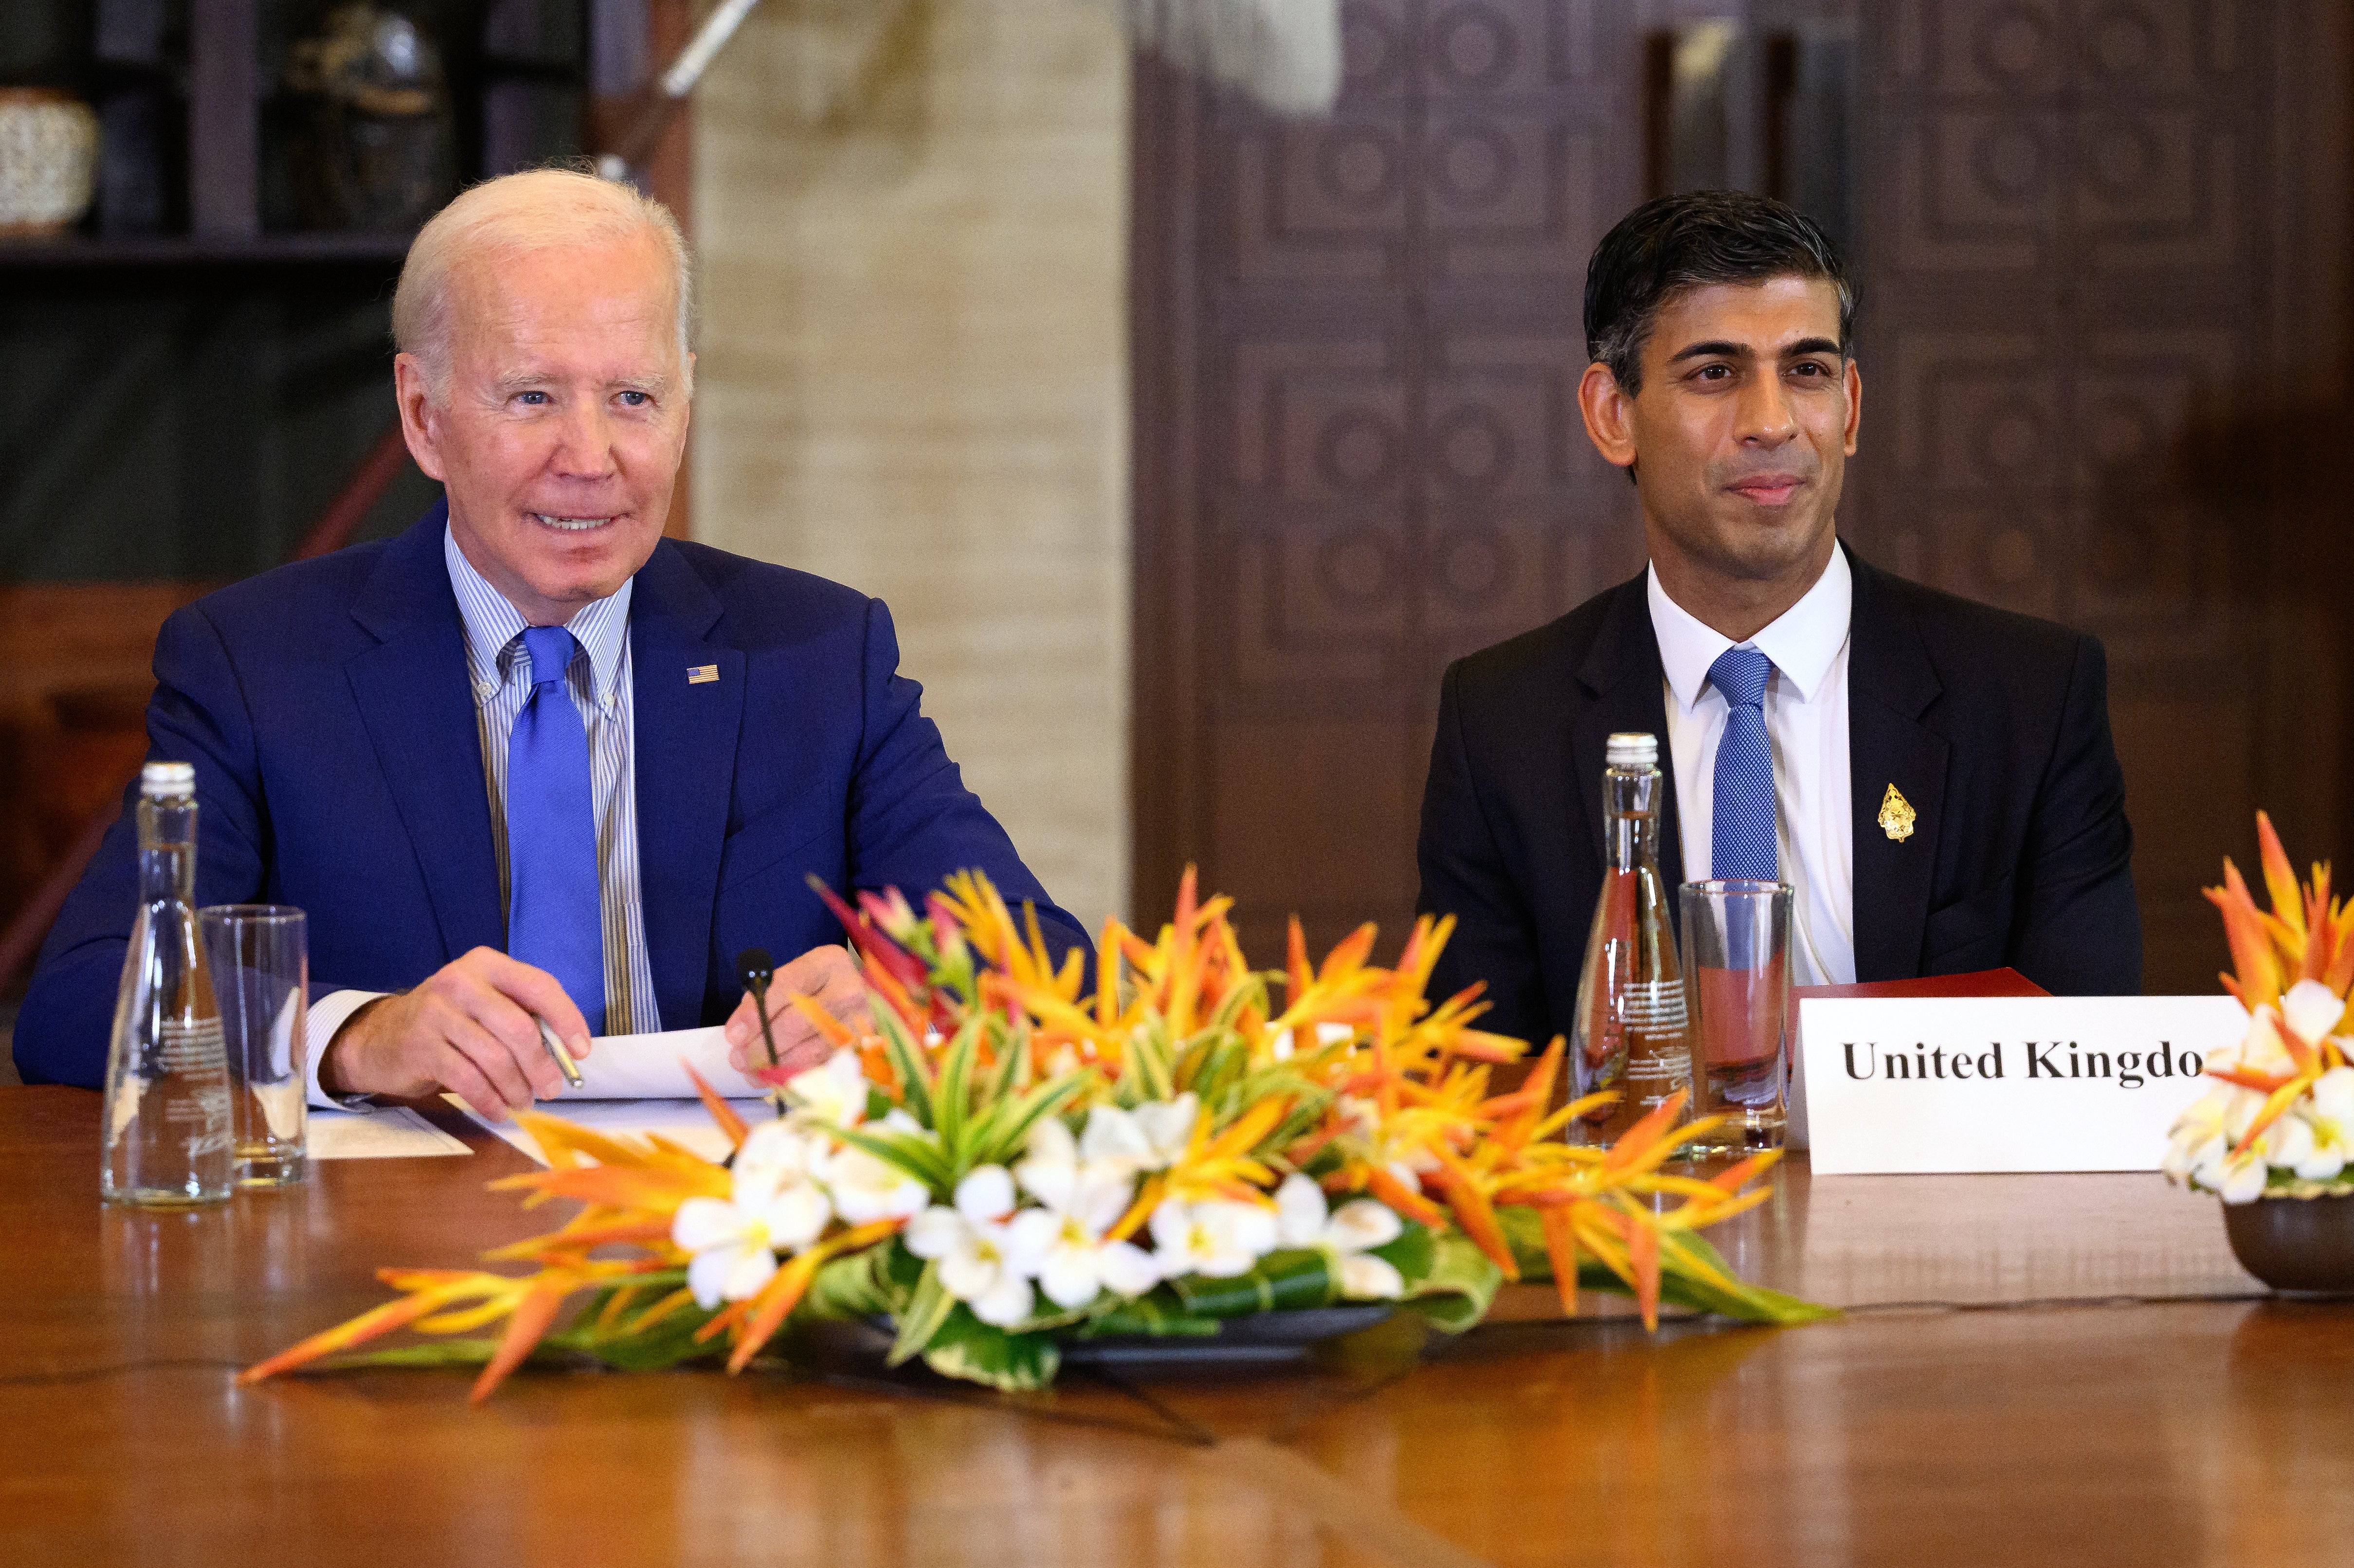 US president Joe Biden and British prime minister Rishi Sunak attend a meeting of leaders at the G20 summit after a missile landed in Poland near the Ukrainian border, on 16 November 2022 in Nusa Dua, Indonesia